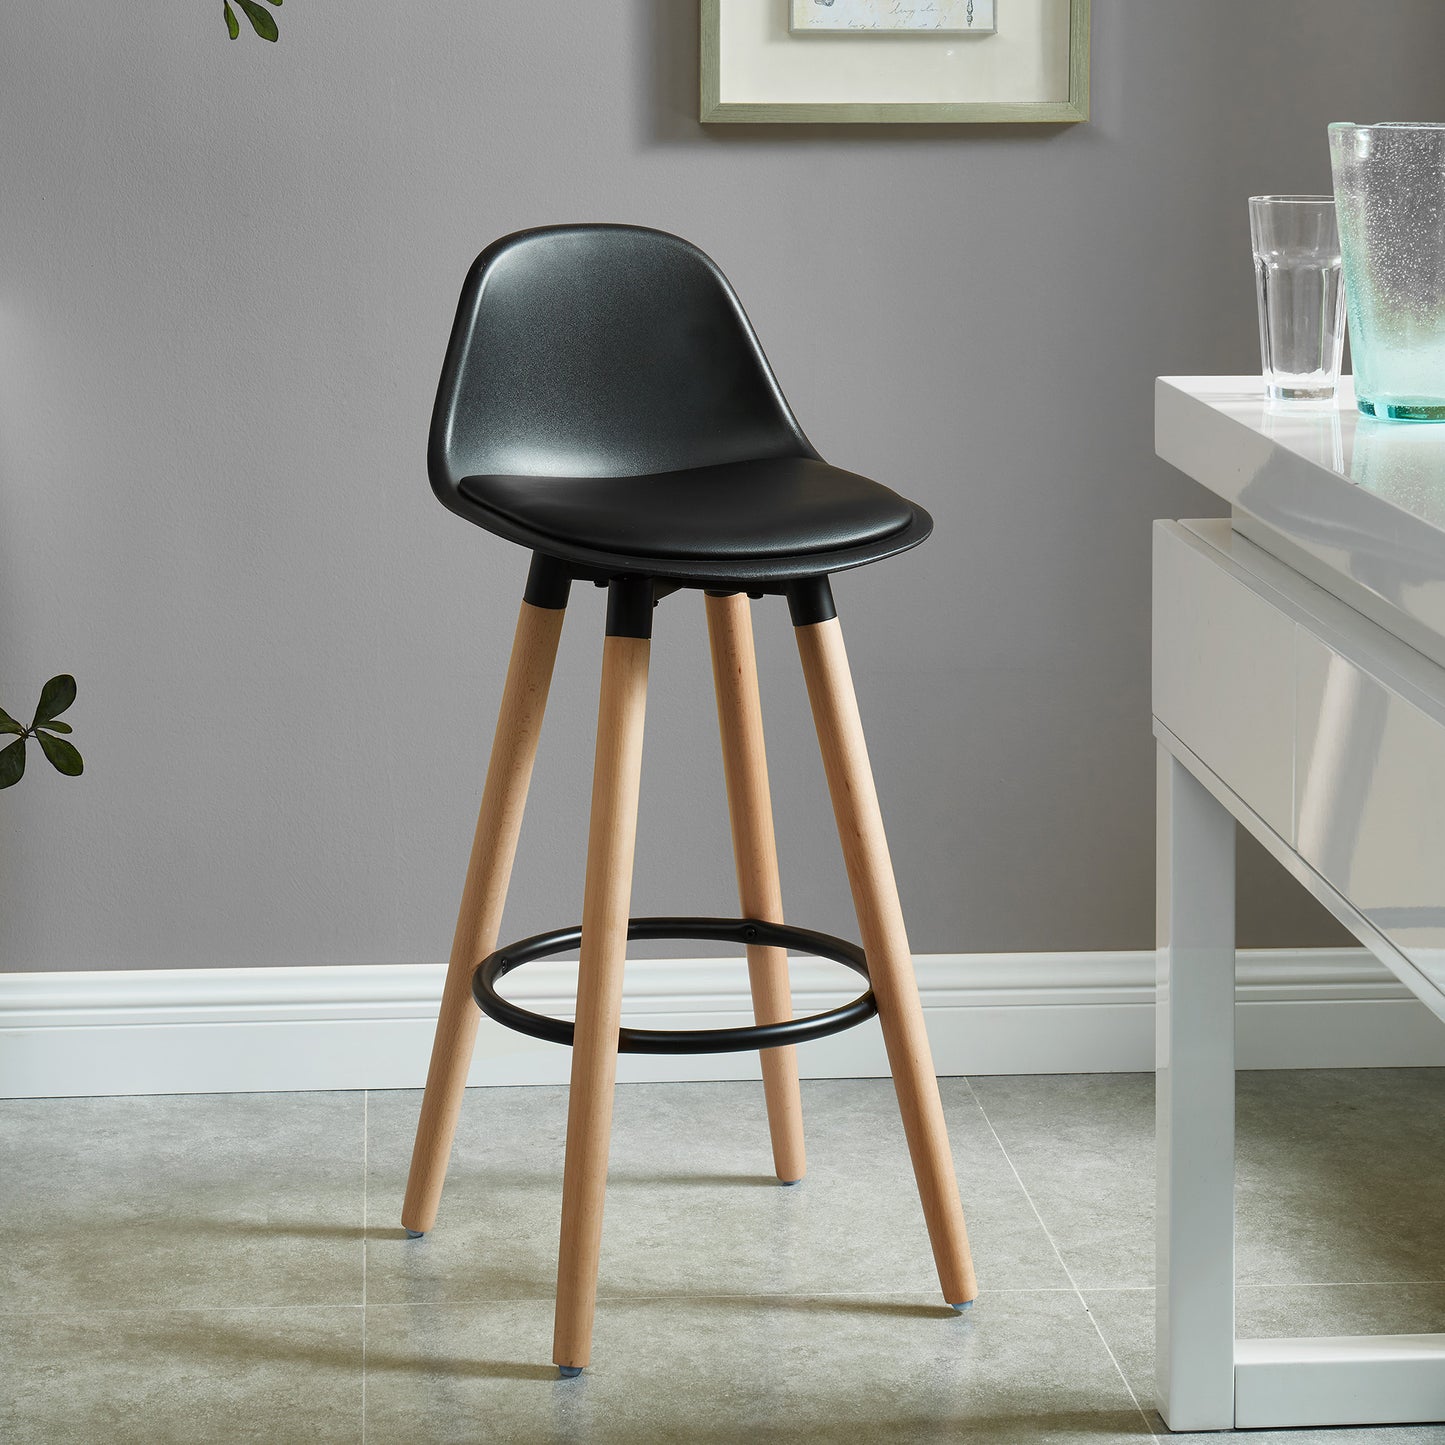 (DIABLO BLACK - 2 PACK) - LEATHER COUNTER STOOLS